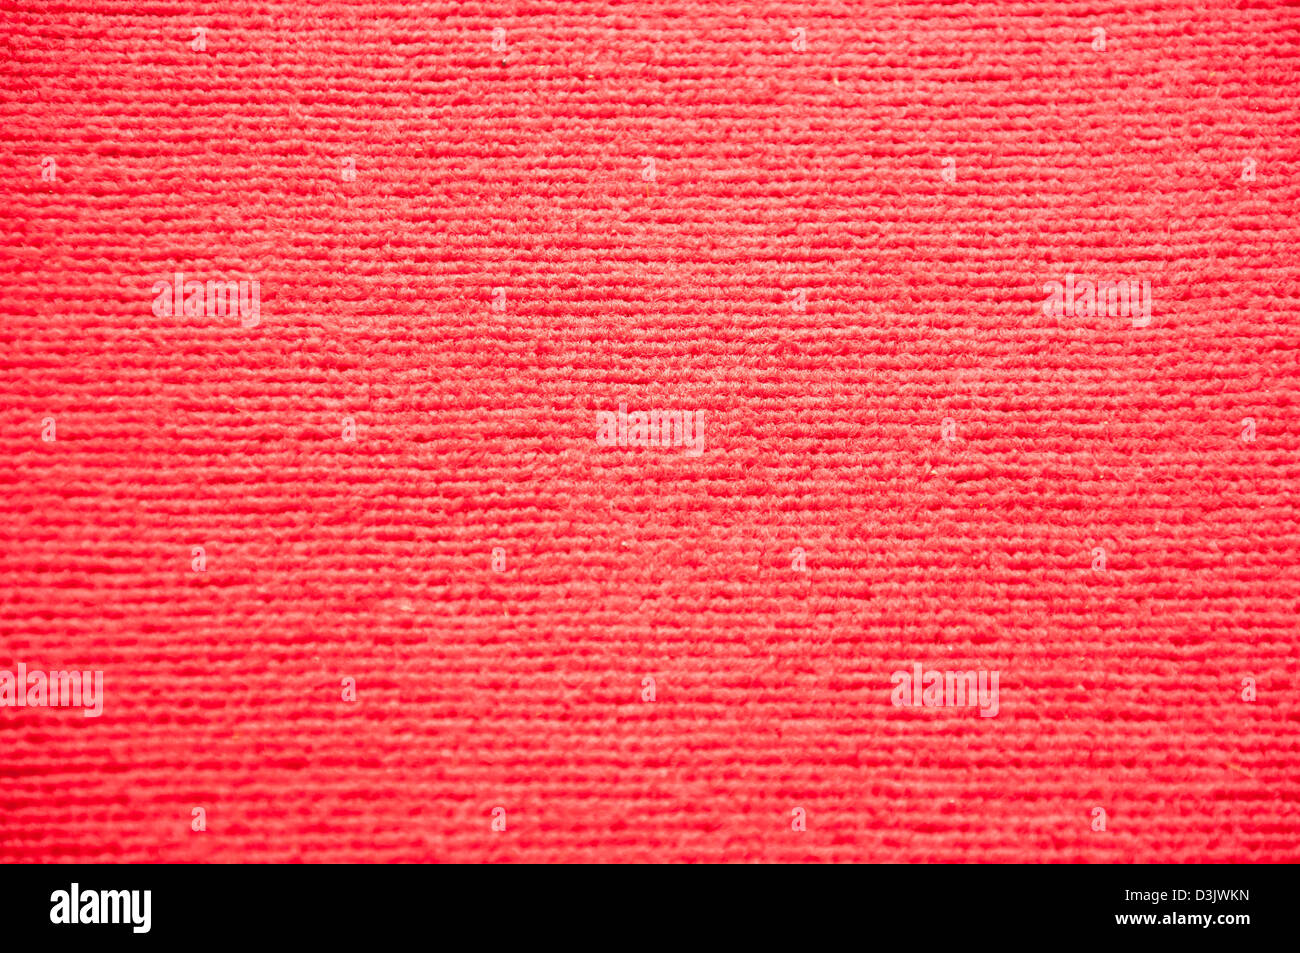 red carpet texture background Stock Photo